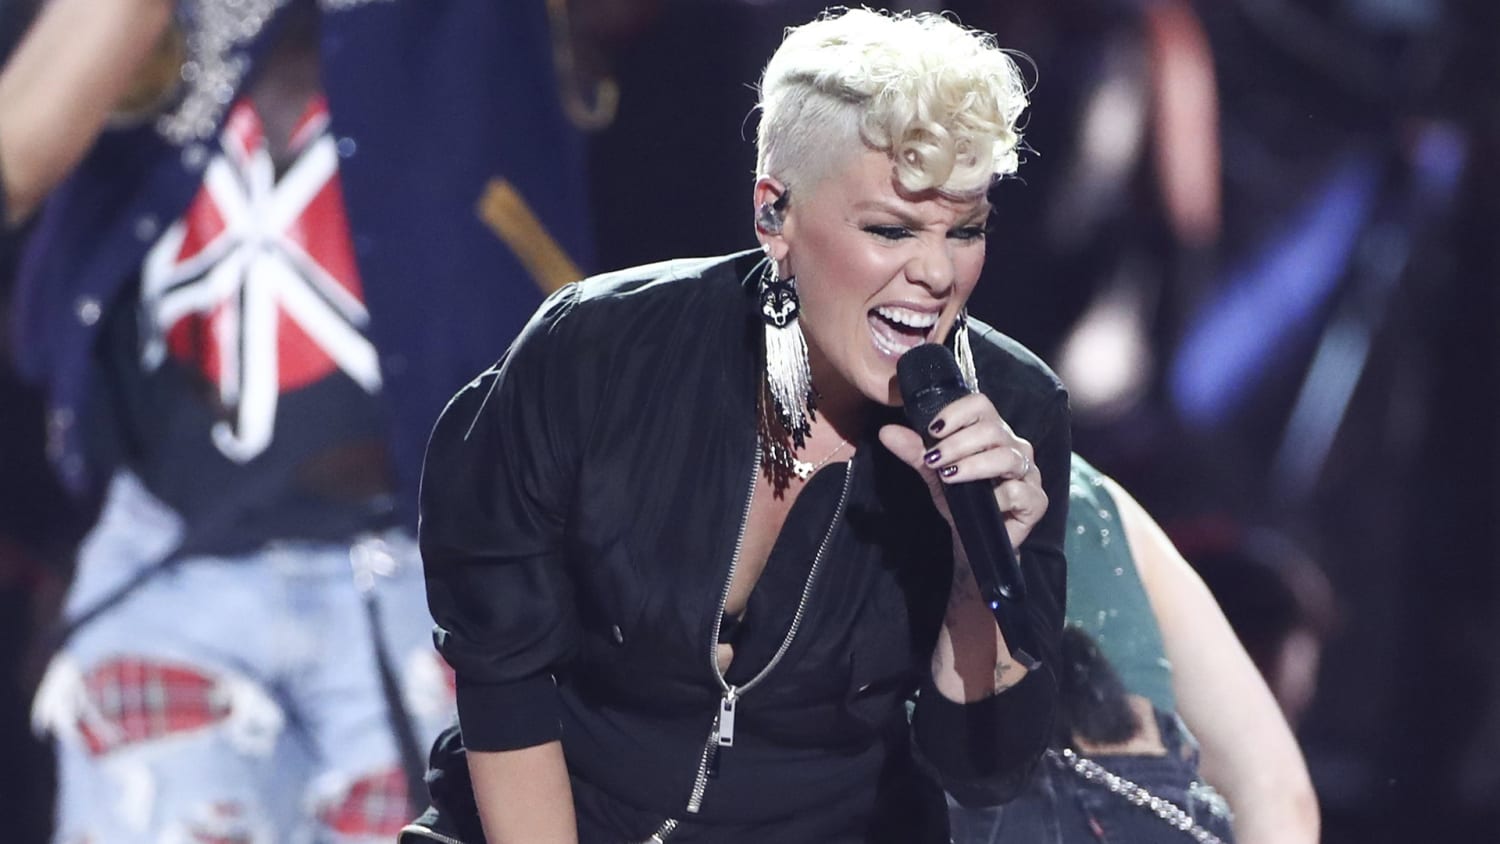 Pink can't believe her Super Bowl luck: She's singing and the